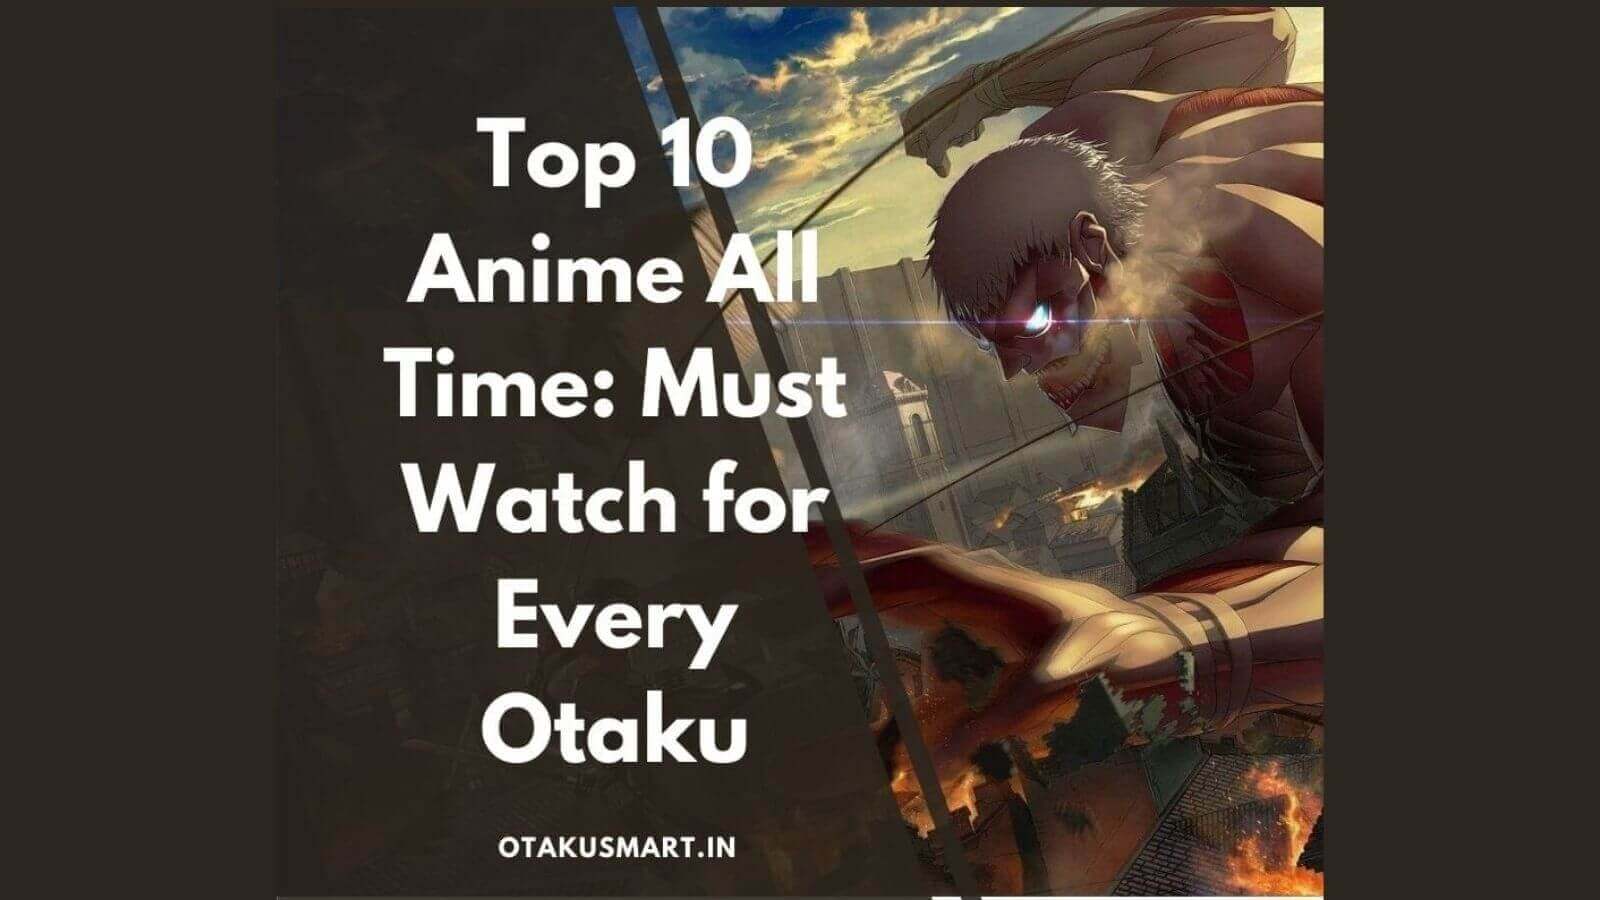 Top 10 Anime All Time: Must Watch for Every Otaku